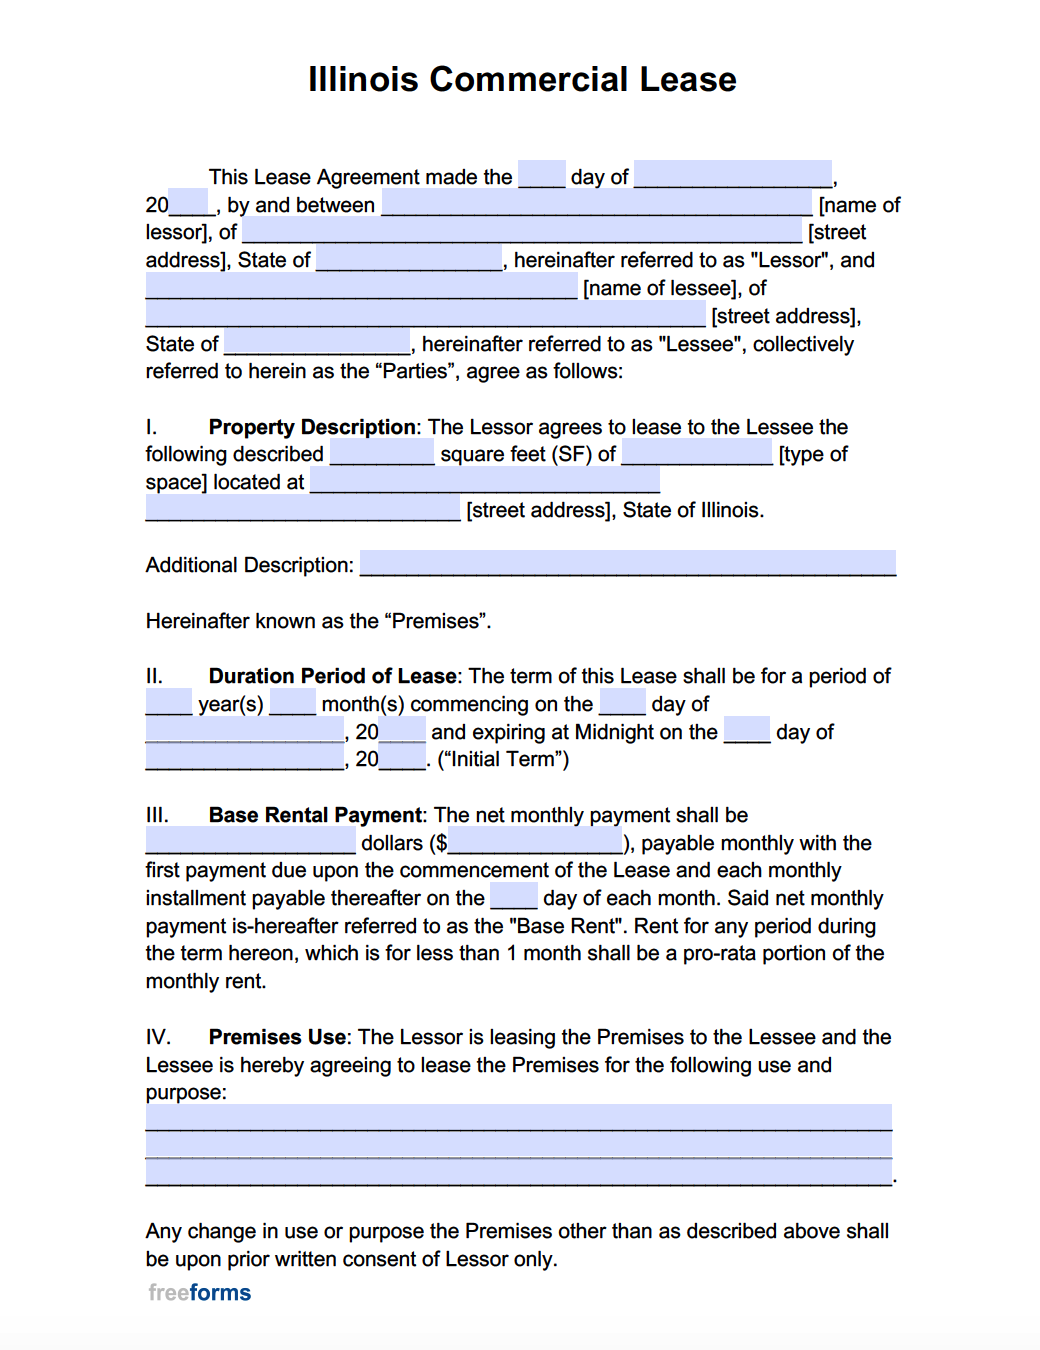 free-illinois-lease-agreement-form-printable-form-templates-and-letter